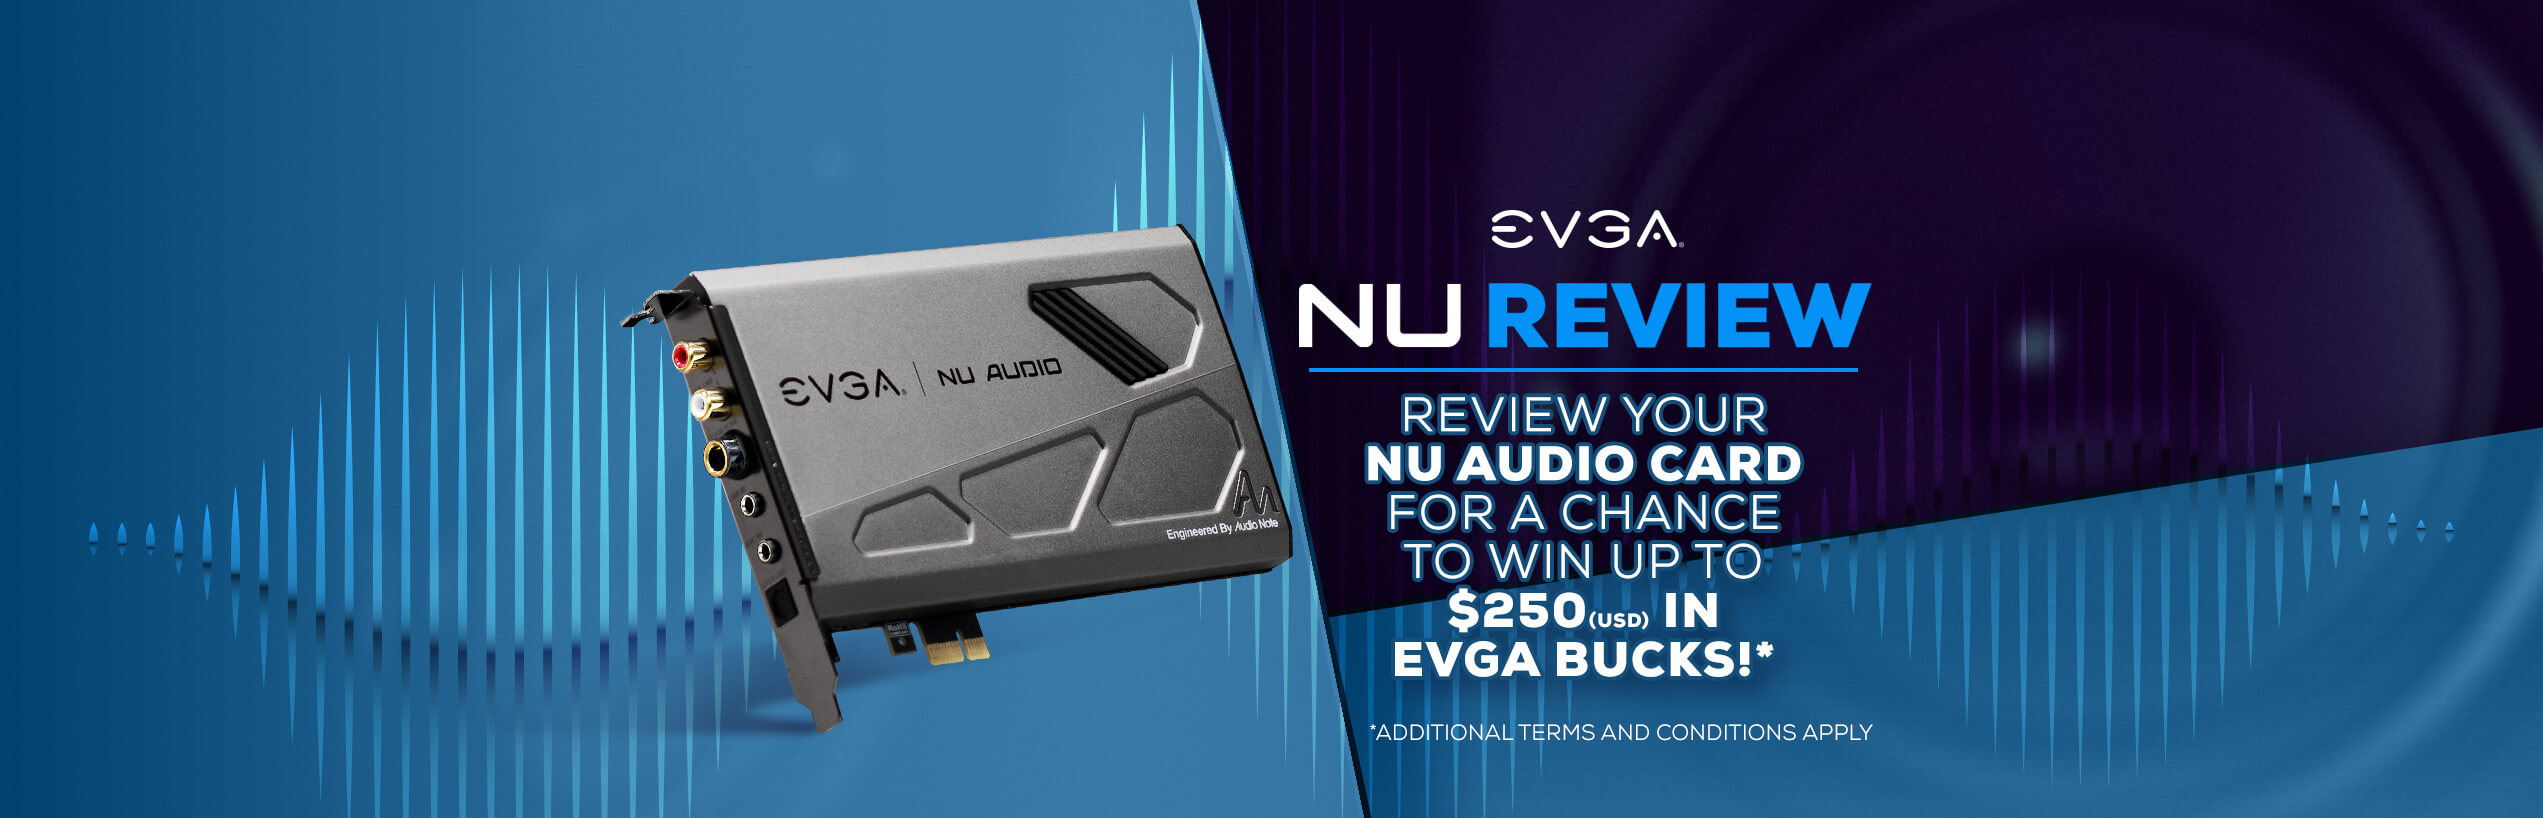 The EVGA NU Audio Card Review promotion